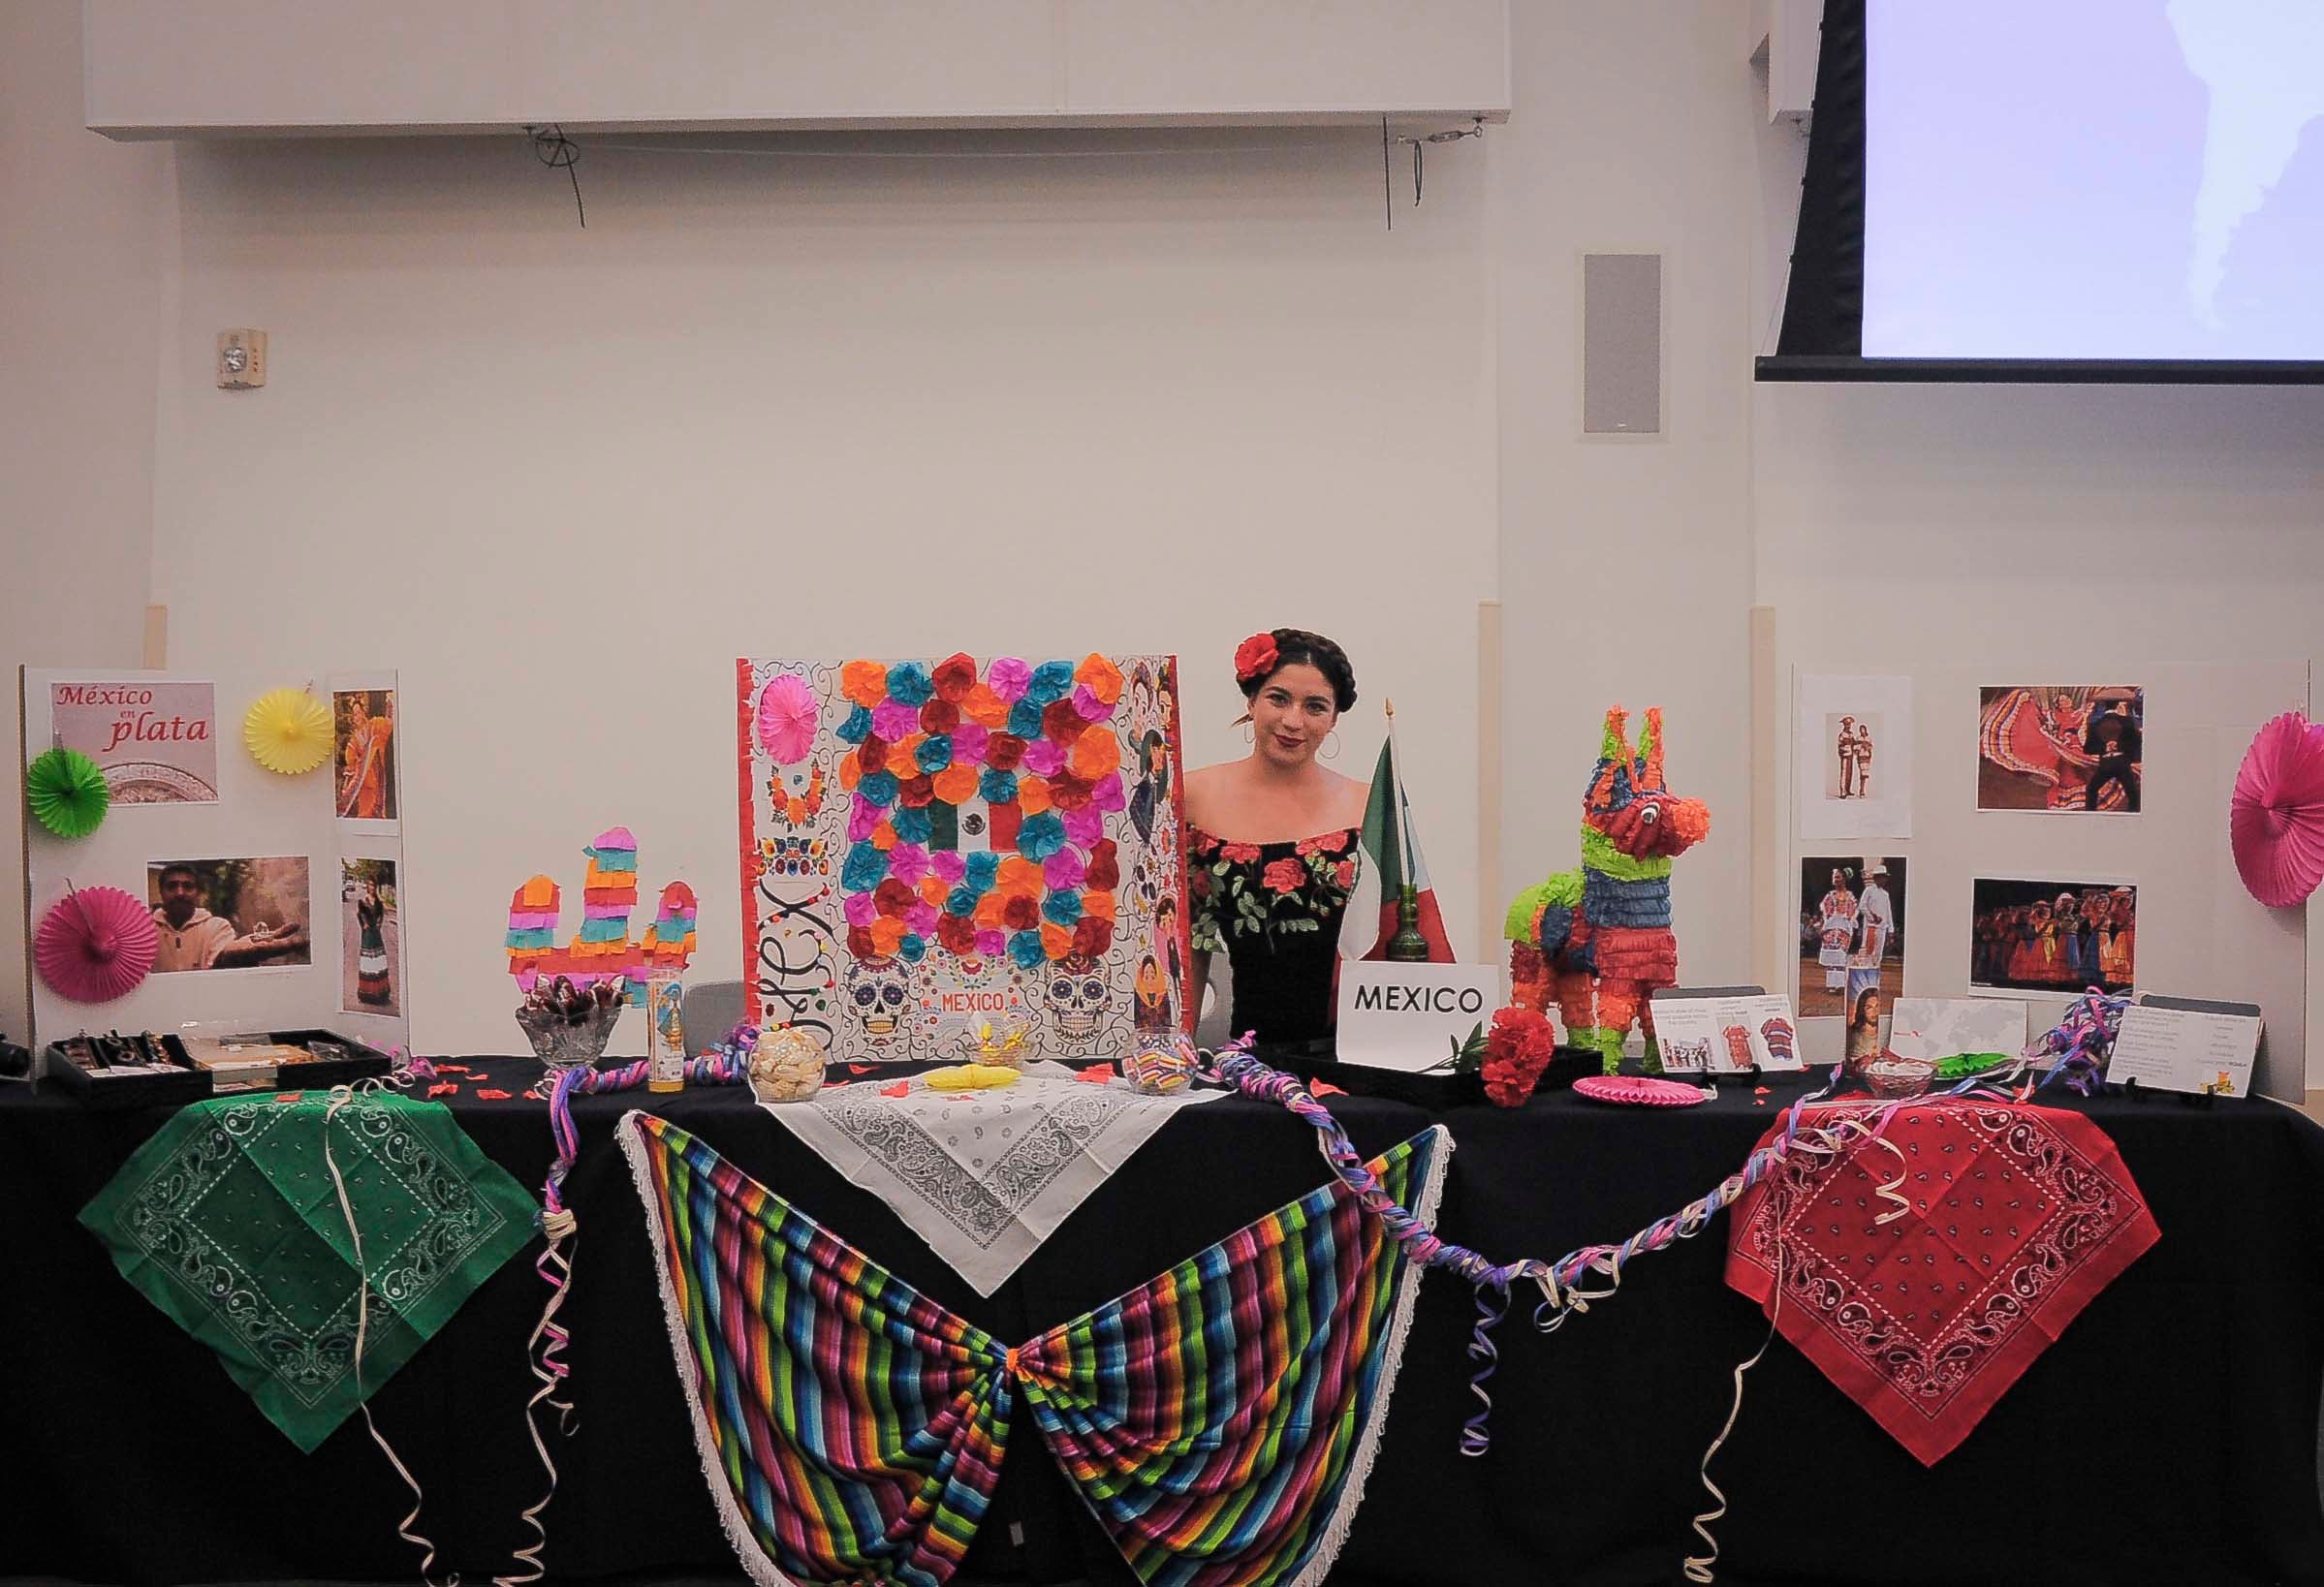 Girl stands behind bright and colorful "Mexico" table. Flowers, a piñata, and paper decor surround her.